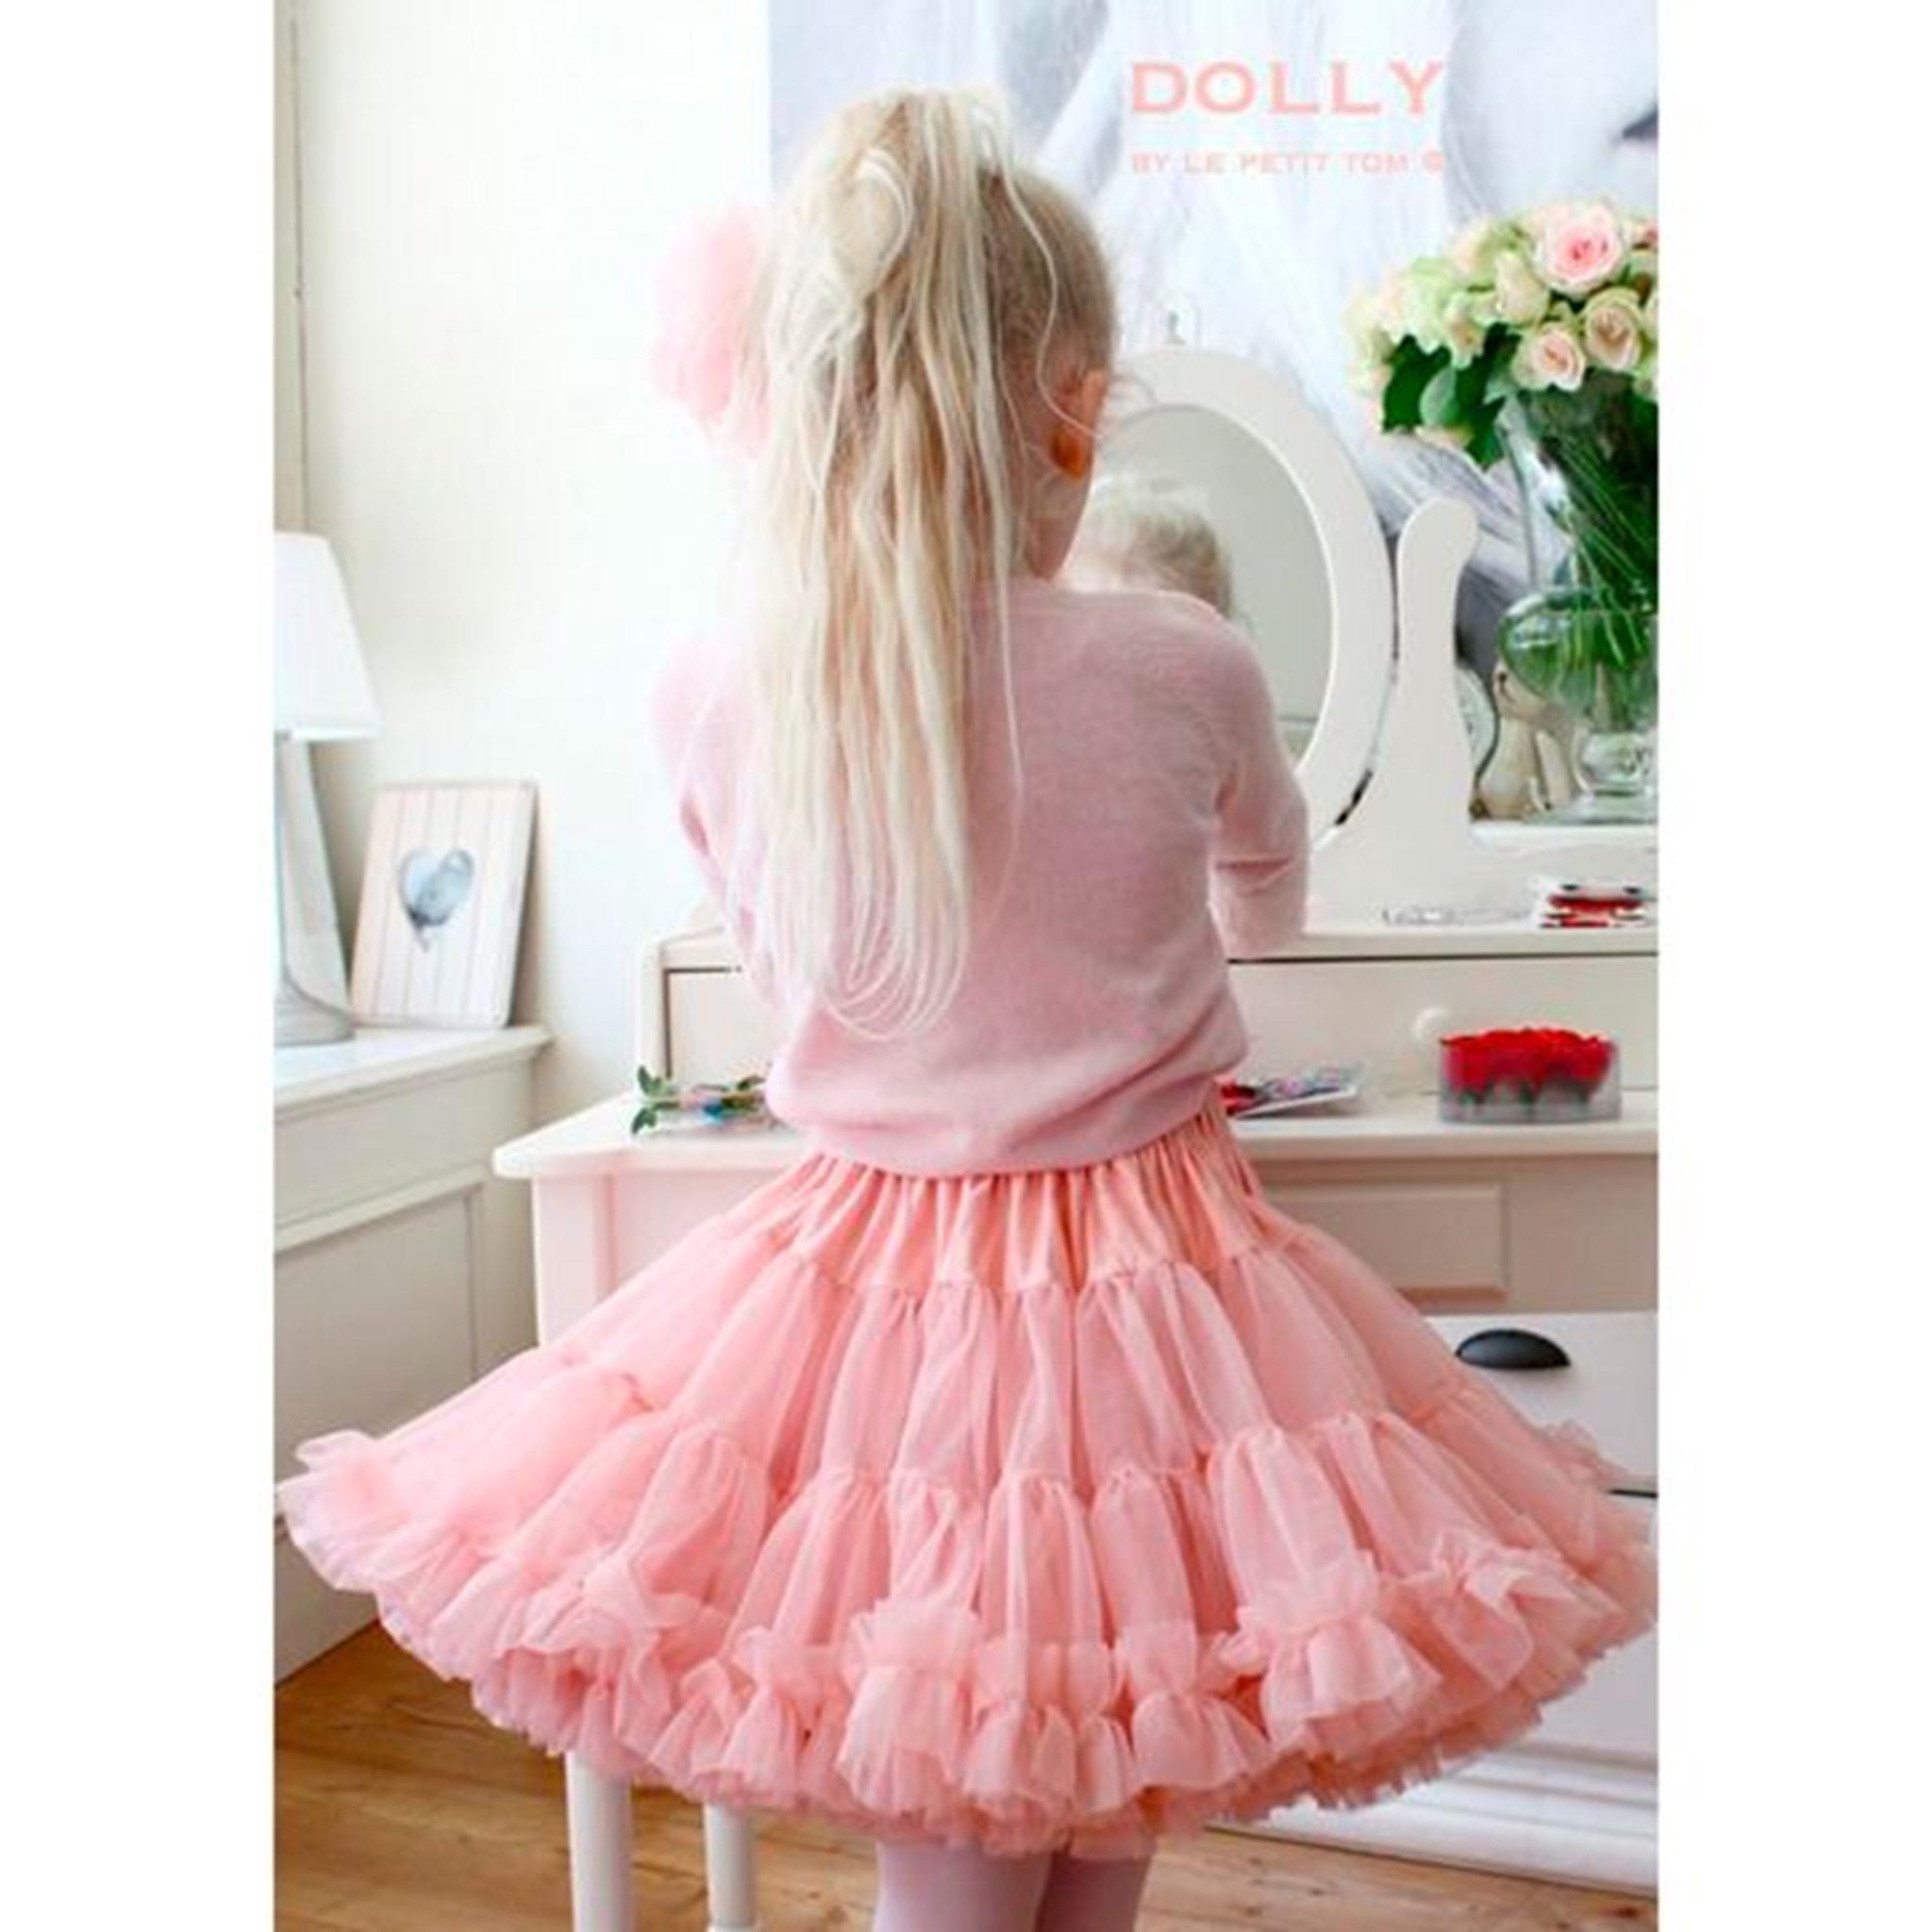 Dolly by Le Petit Tom Skirt Rose Pink 2